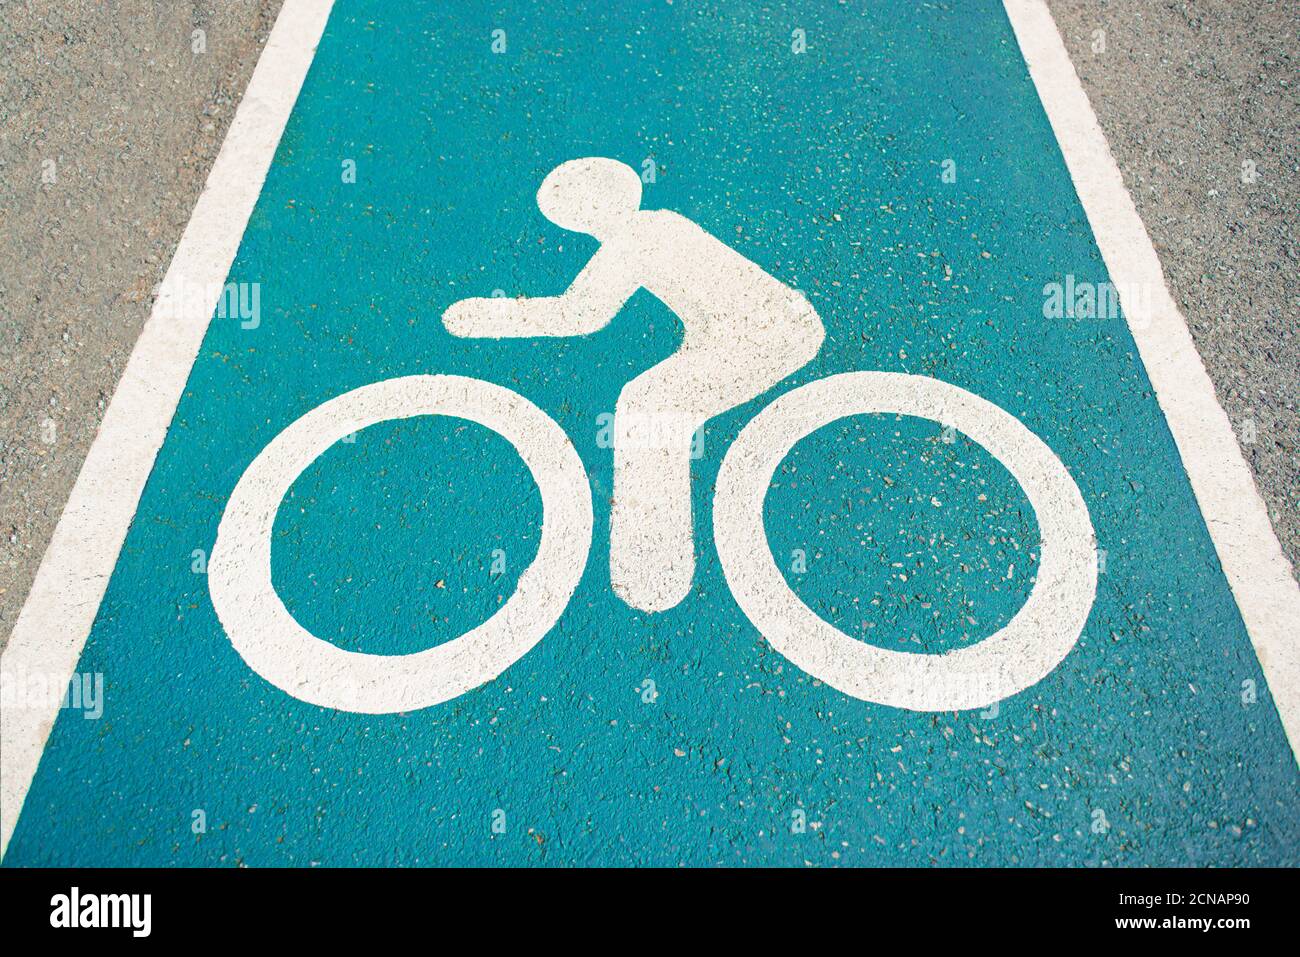 Separate bicycle lane for riding bicycles.Bicycle icon on the lane .New public asphalt bicycle lane  close up beside the road.White painted bike on as Stock Photo